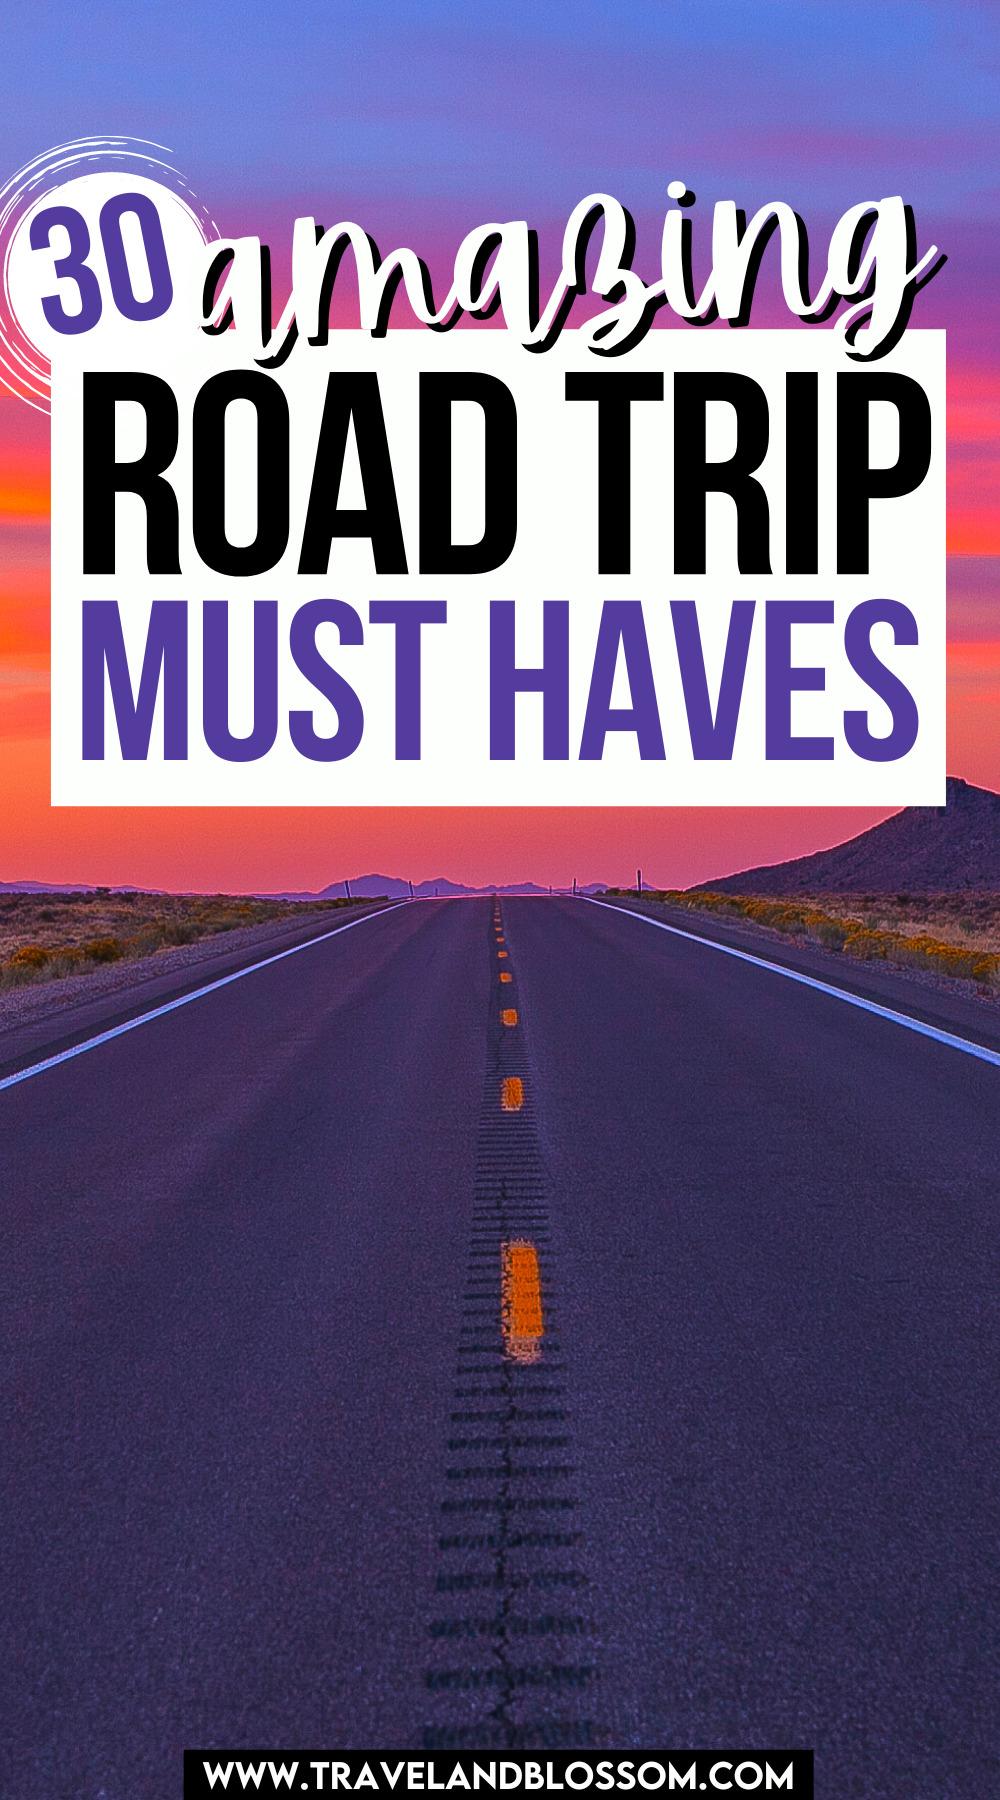 30 Amazing Road Trip Must Haves